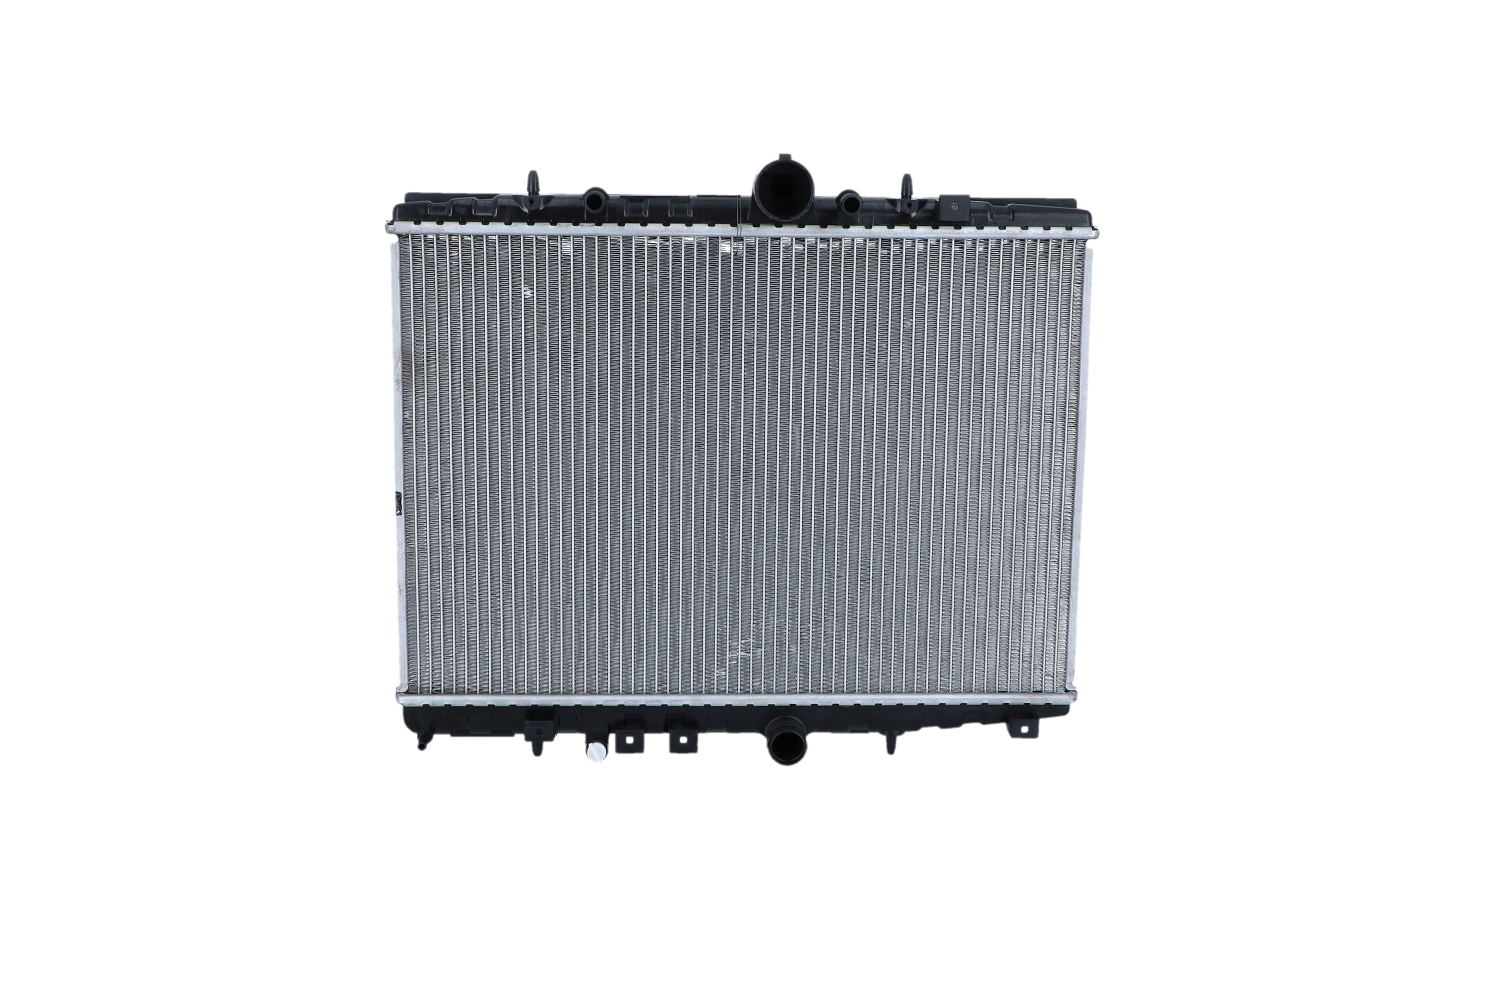 NRF EASY FIT 58341 Engine radiator Aluminium, 555 x 380 x 33 mm, with seal ring, Brazed cooling fins